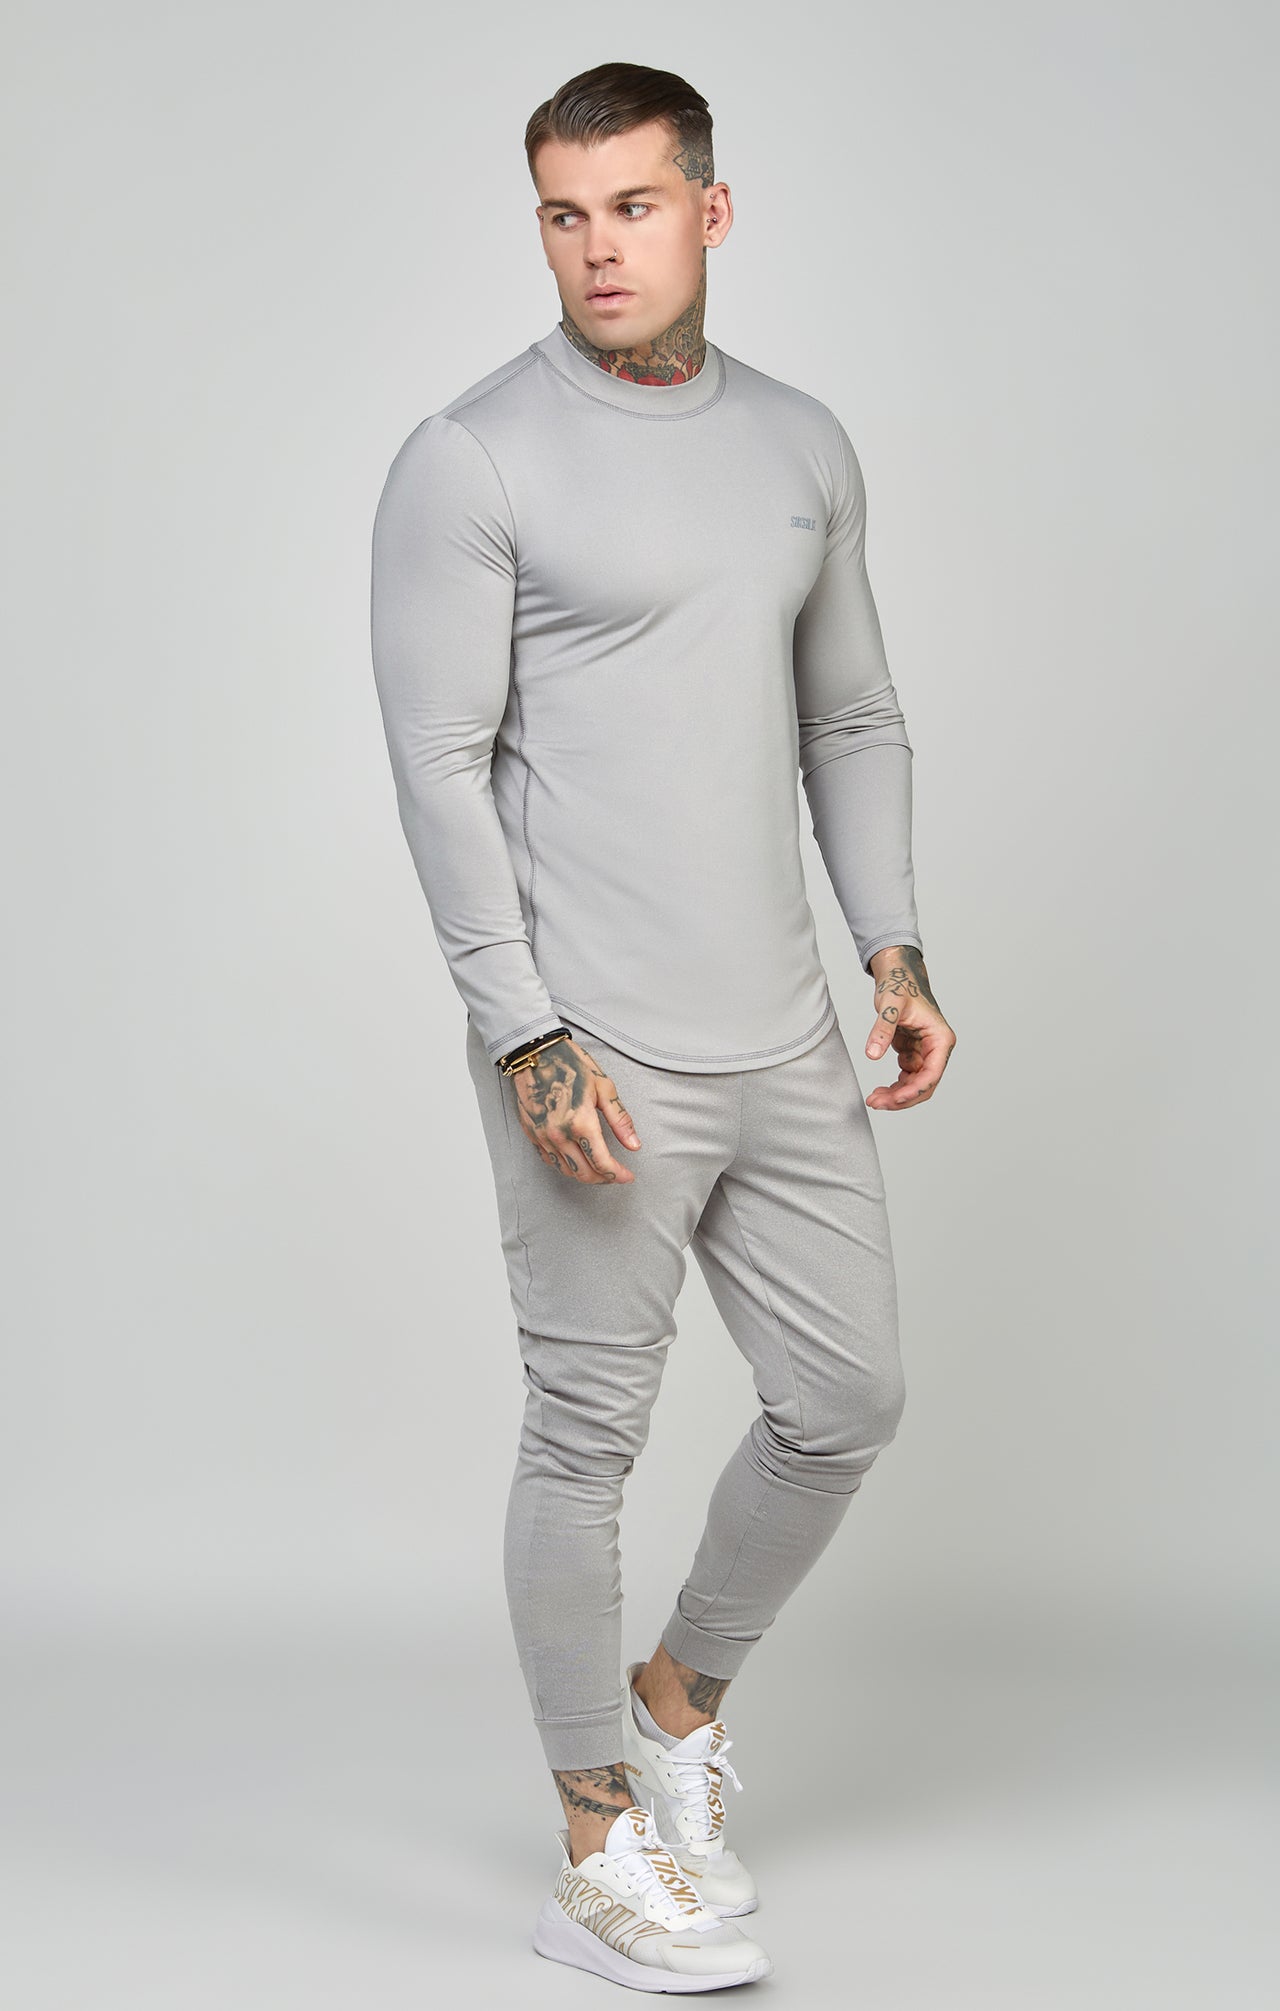 Grey Sports Muscle Fit Long Sleeve Top (1)